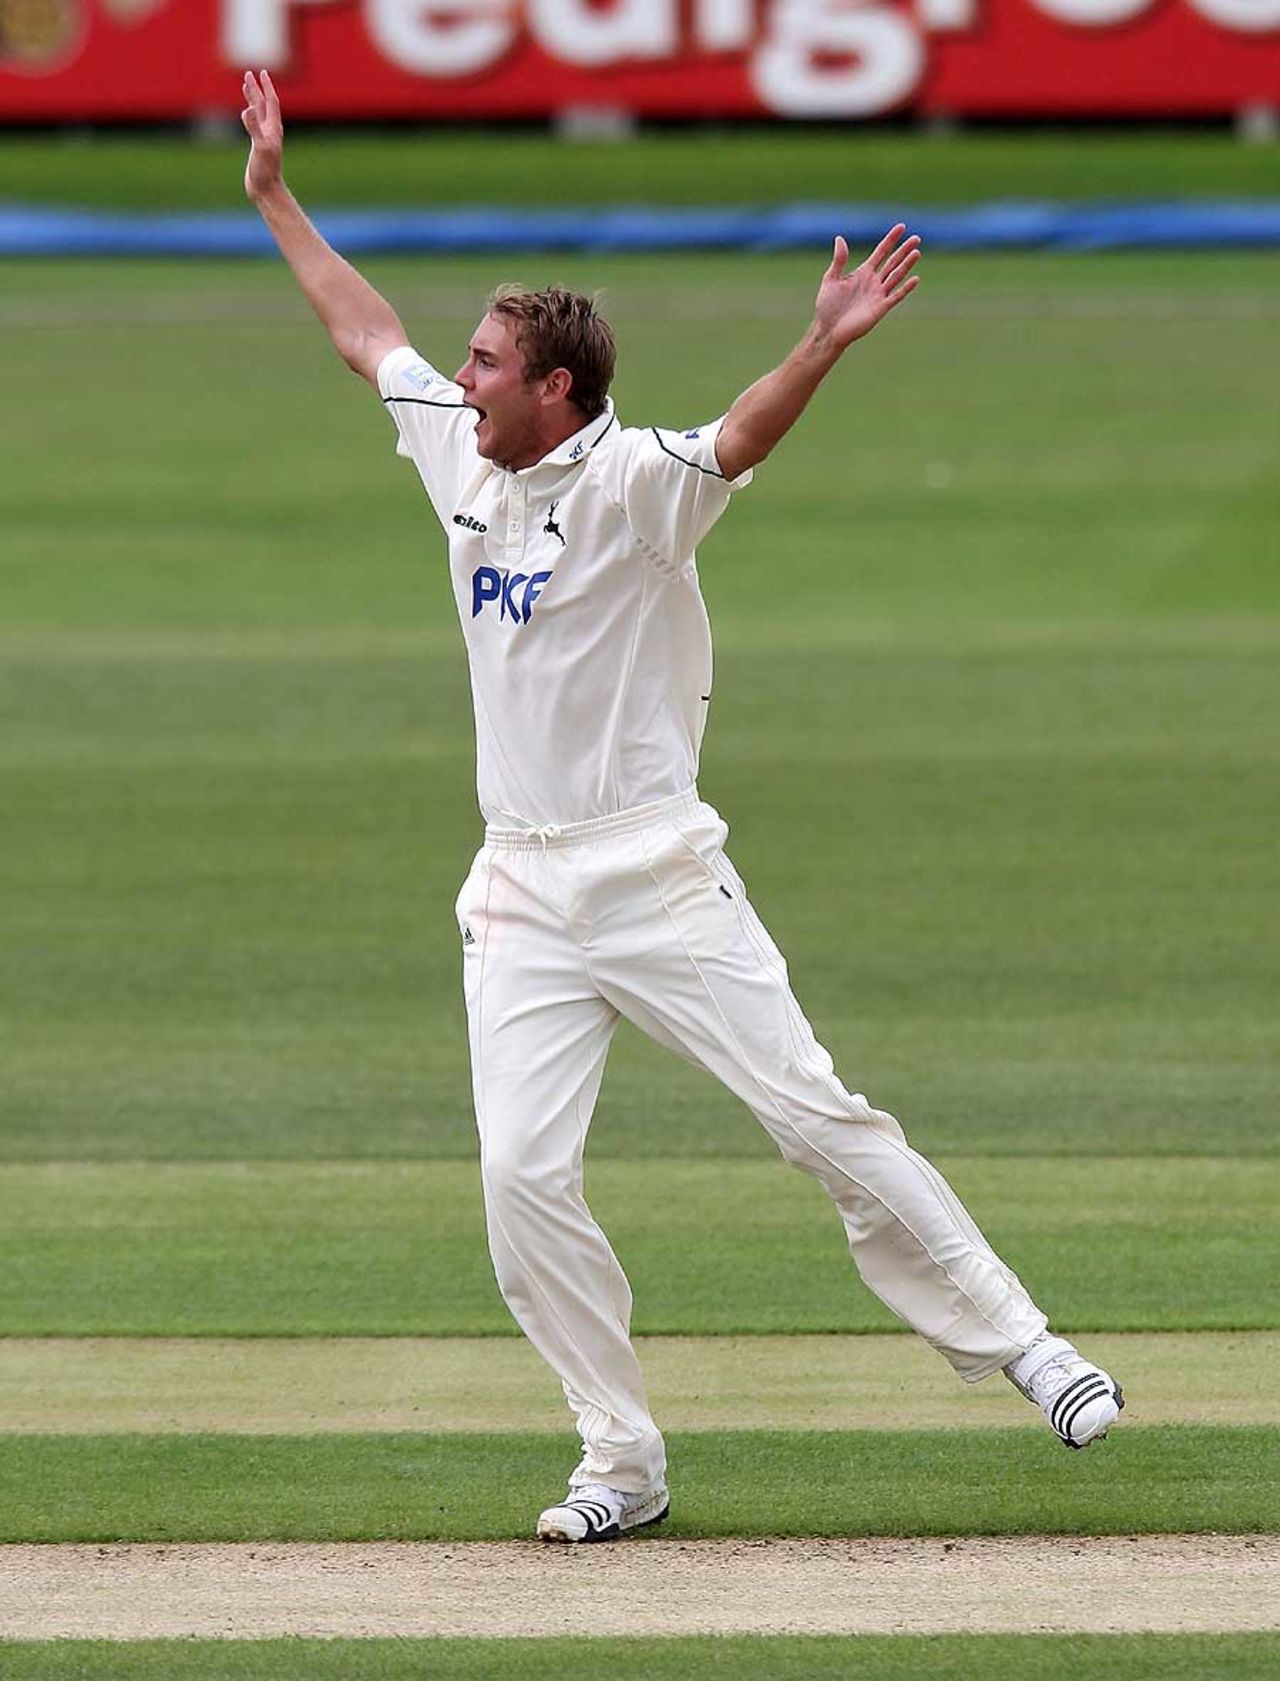 Stuart Broad appeals for the wicket of Jonathan Trott, en route to his career-best figures of 8 for 52, Warwickshire v Nottinghamshire, Edgbaston, 3rd day, July 22, 2010